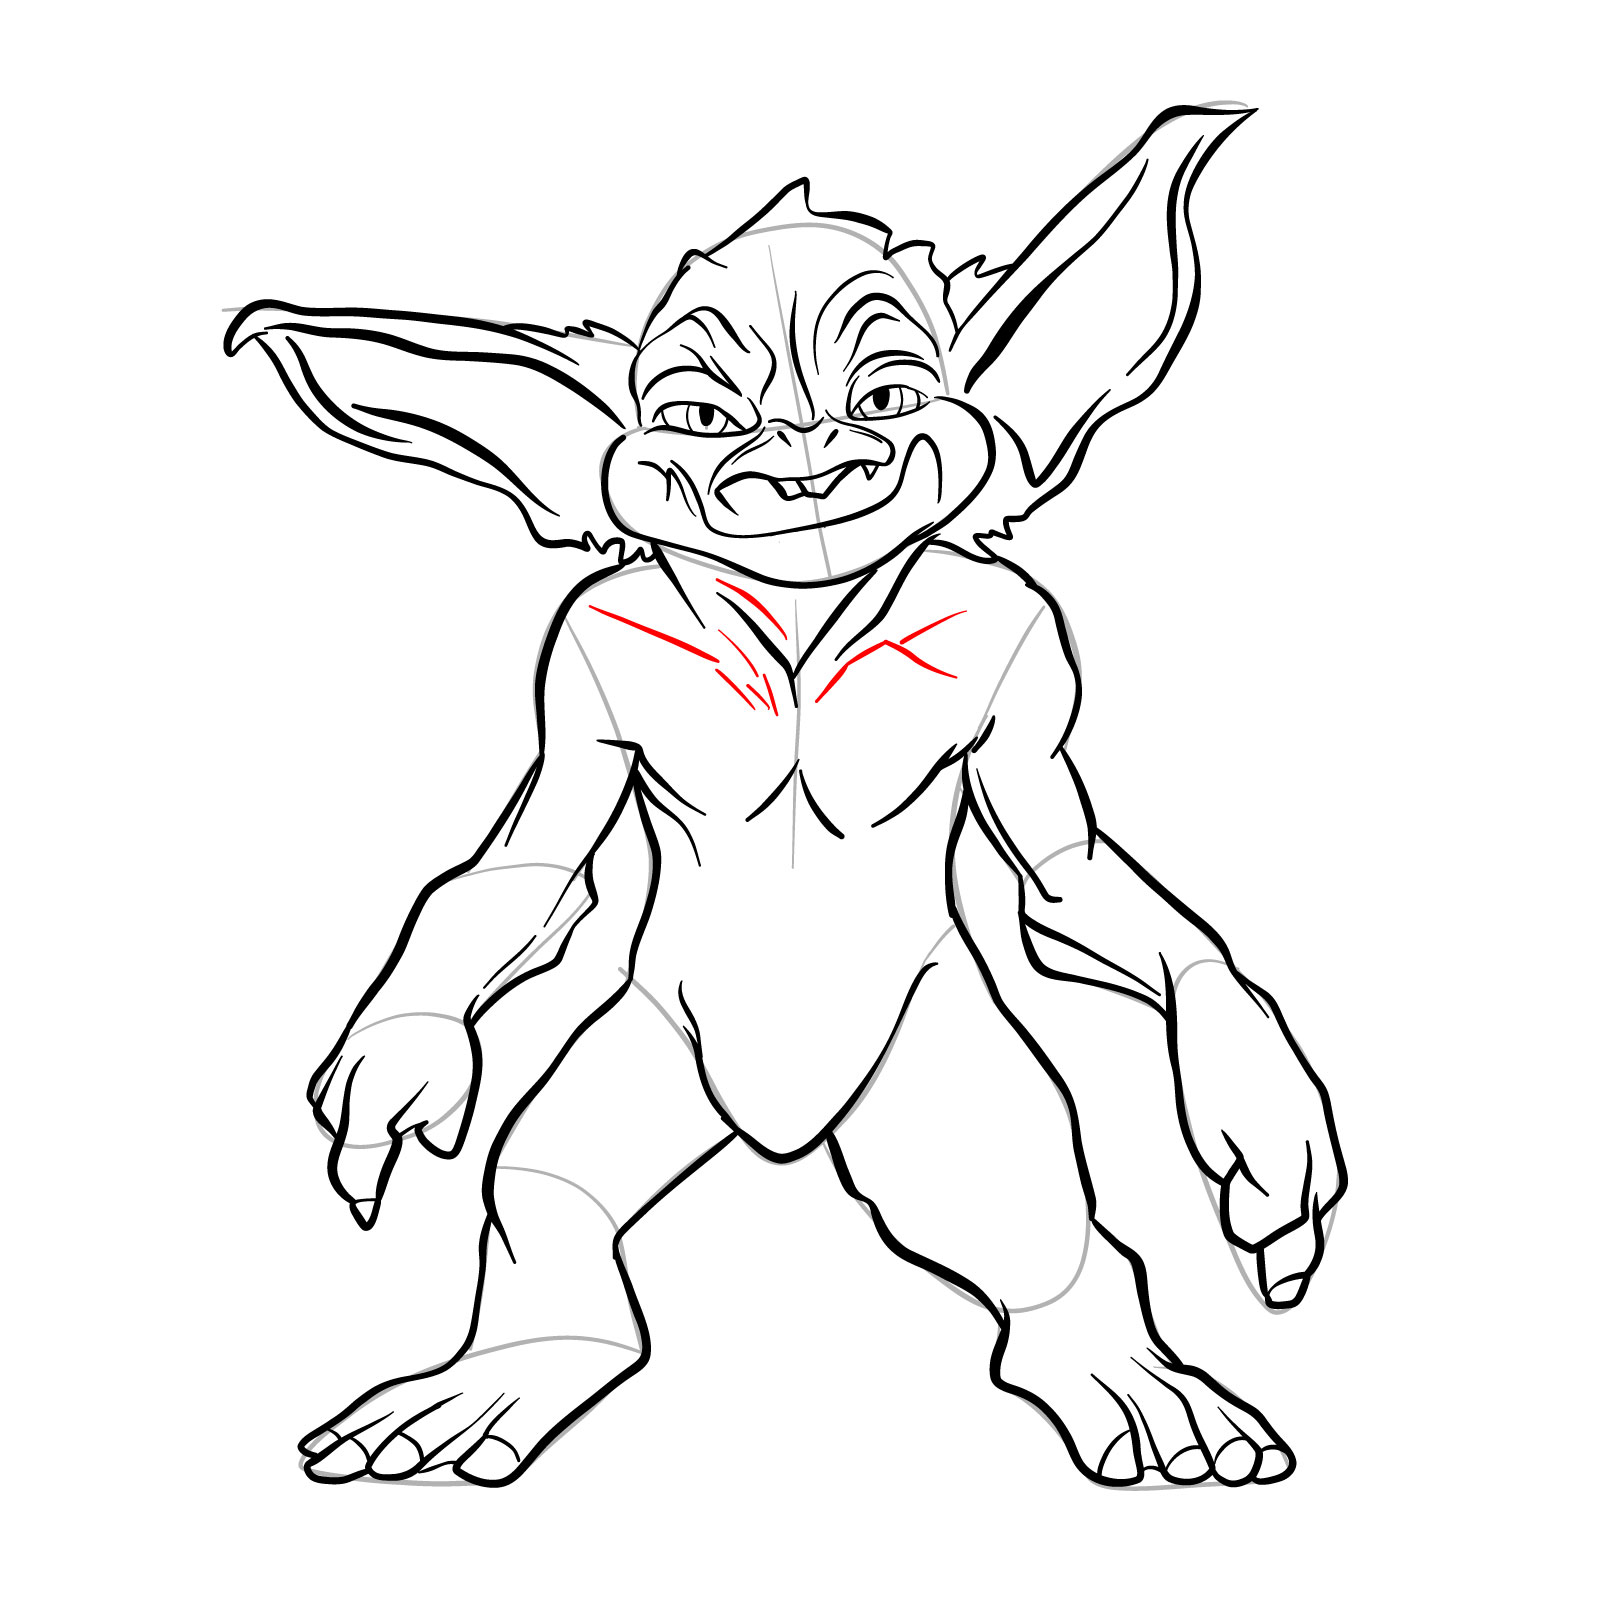 How to draw a Goblin - step 29